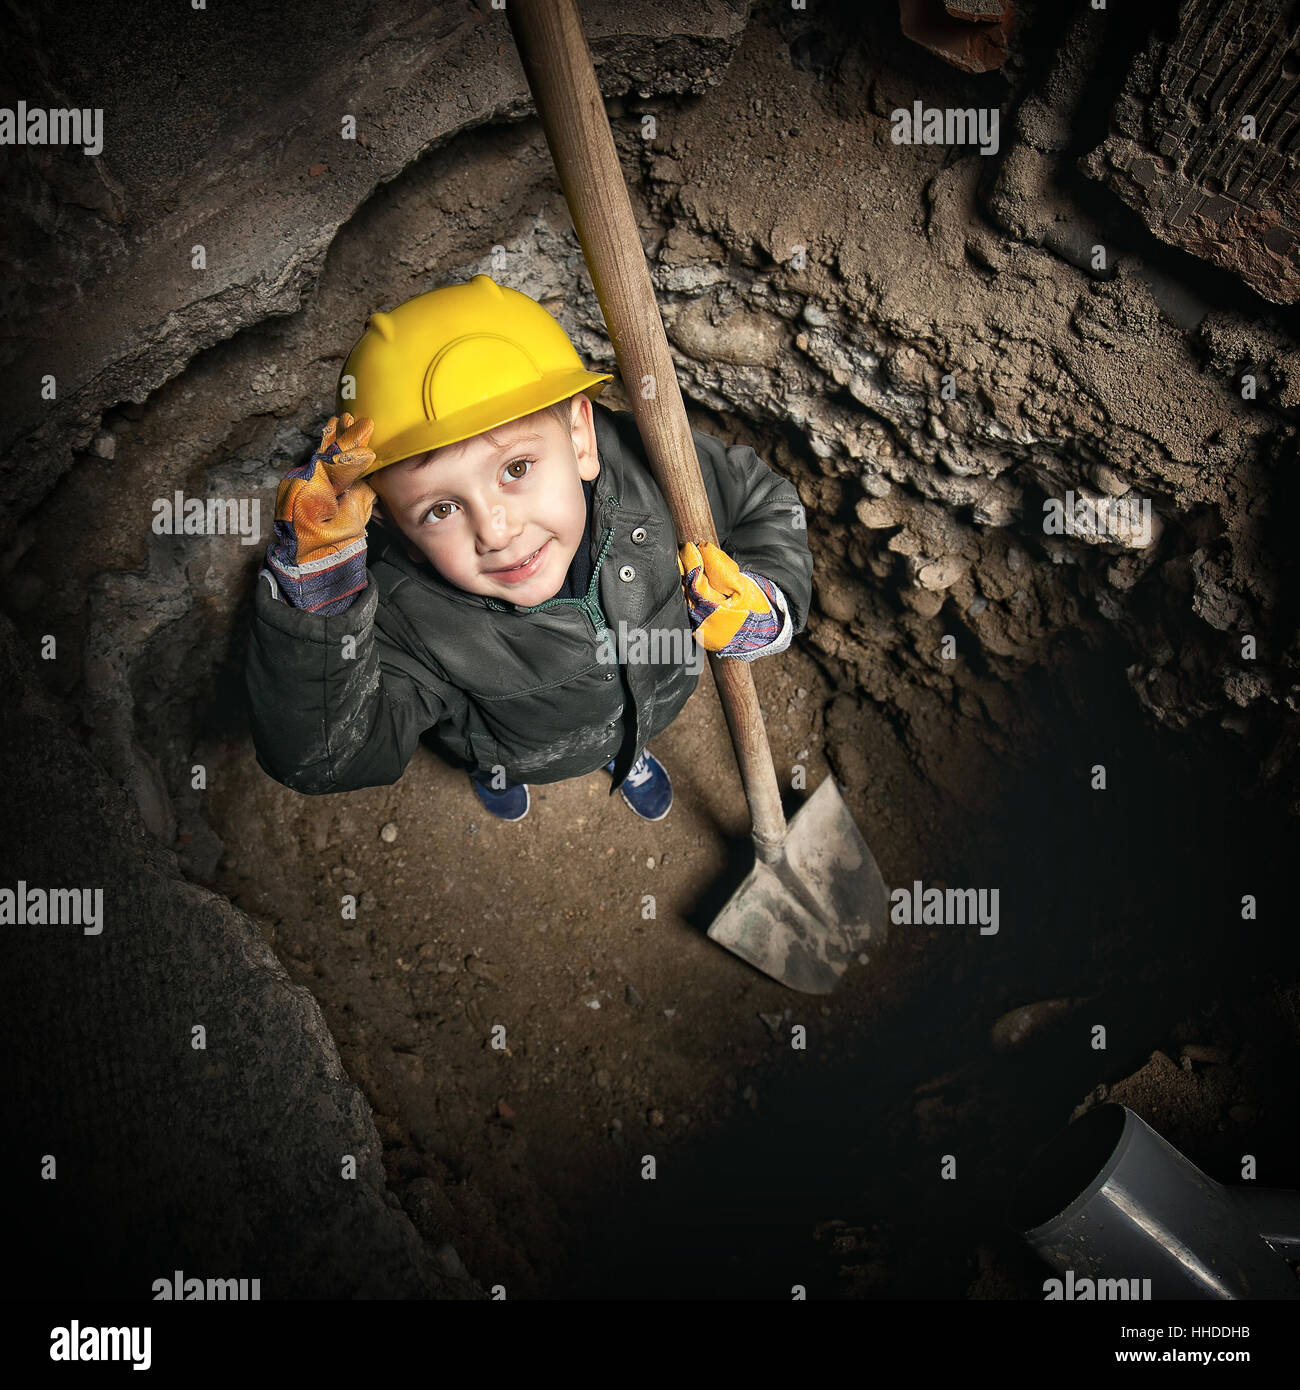 little handyman at work in construction site Stock Photo